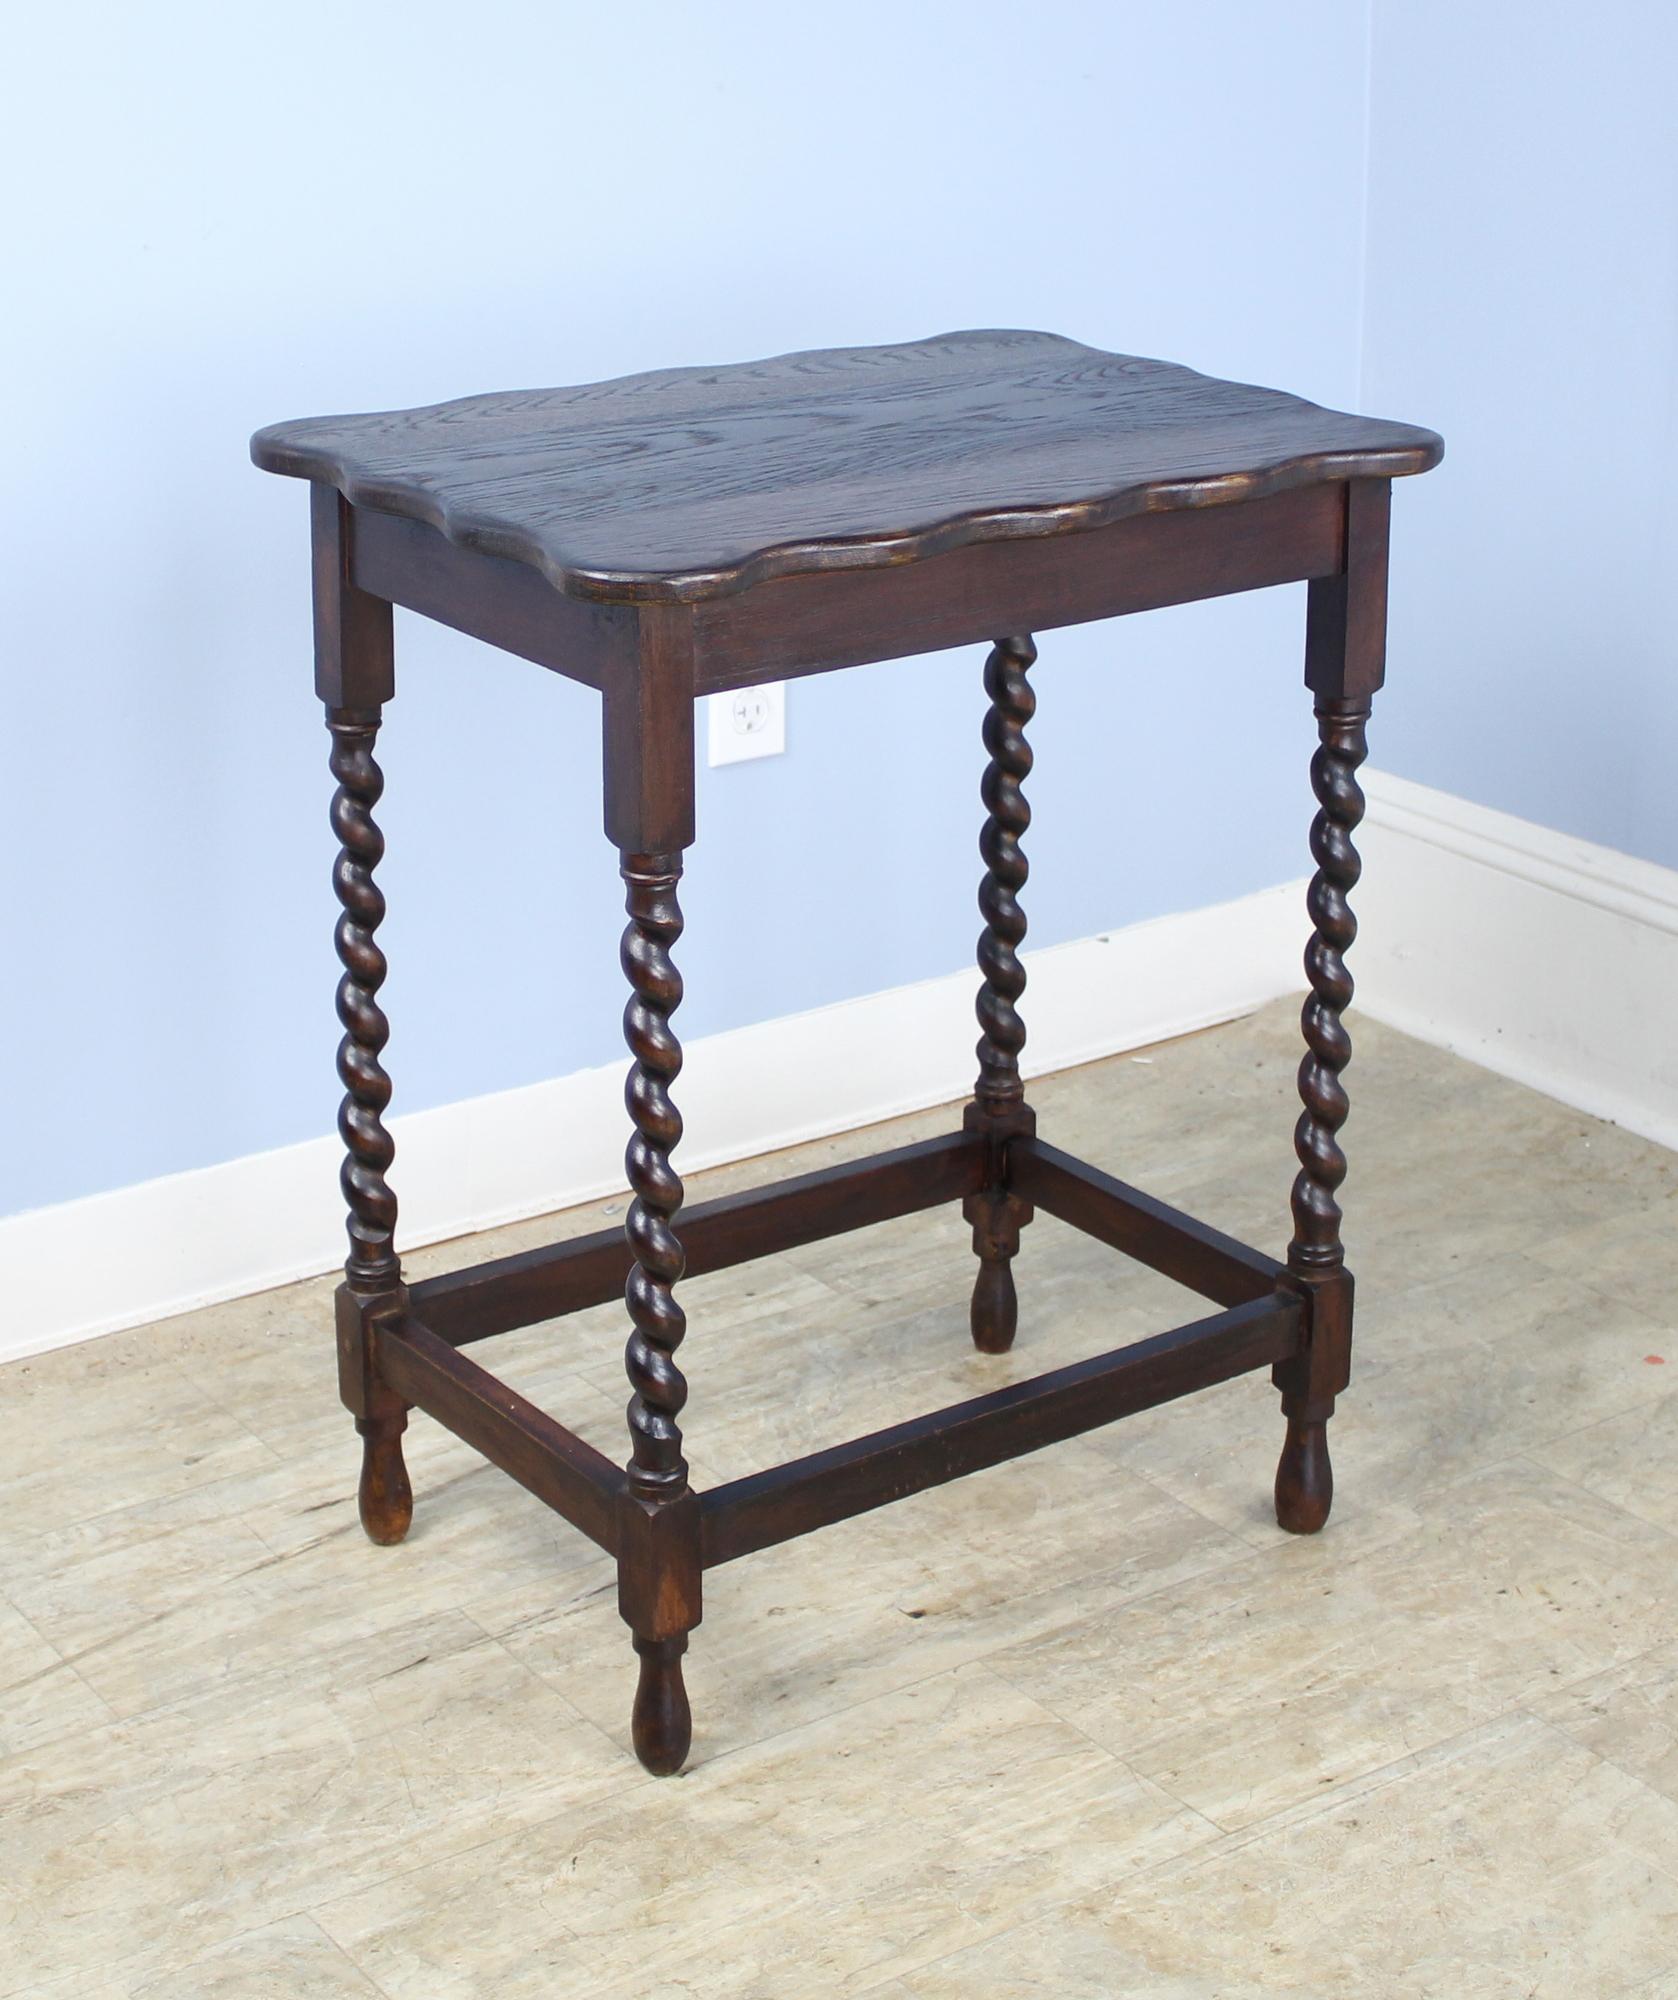 A charming simple occasional table in dark oak with eye-catching barley twist detail. Would make a nice lamp table and would go nicely by the side of a sofa or guest bed.